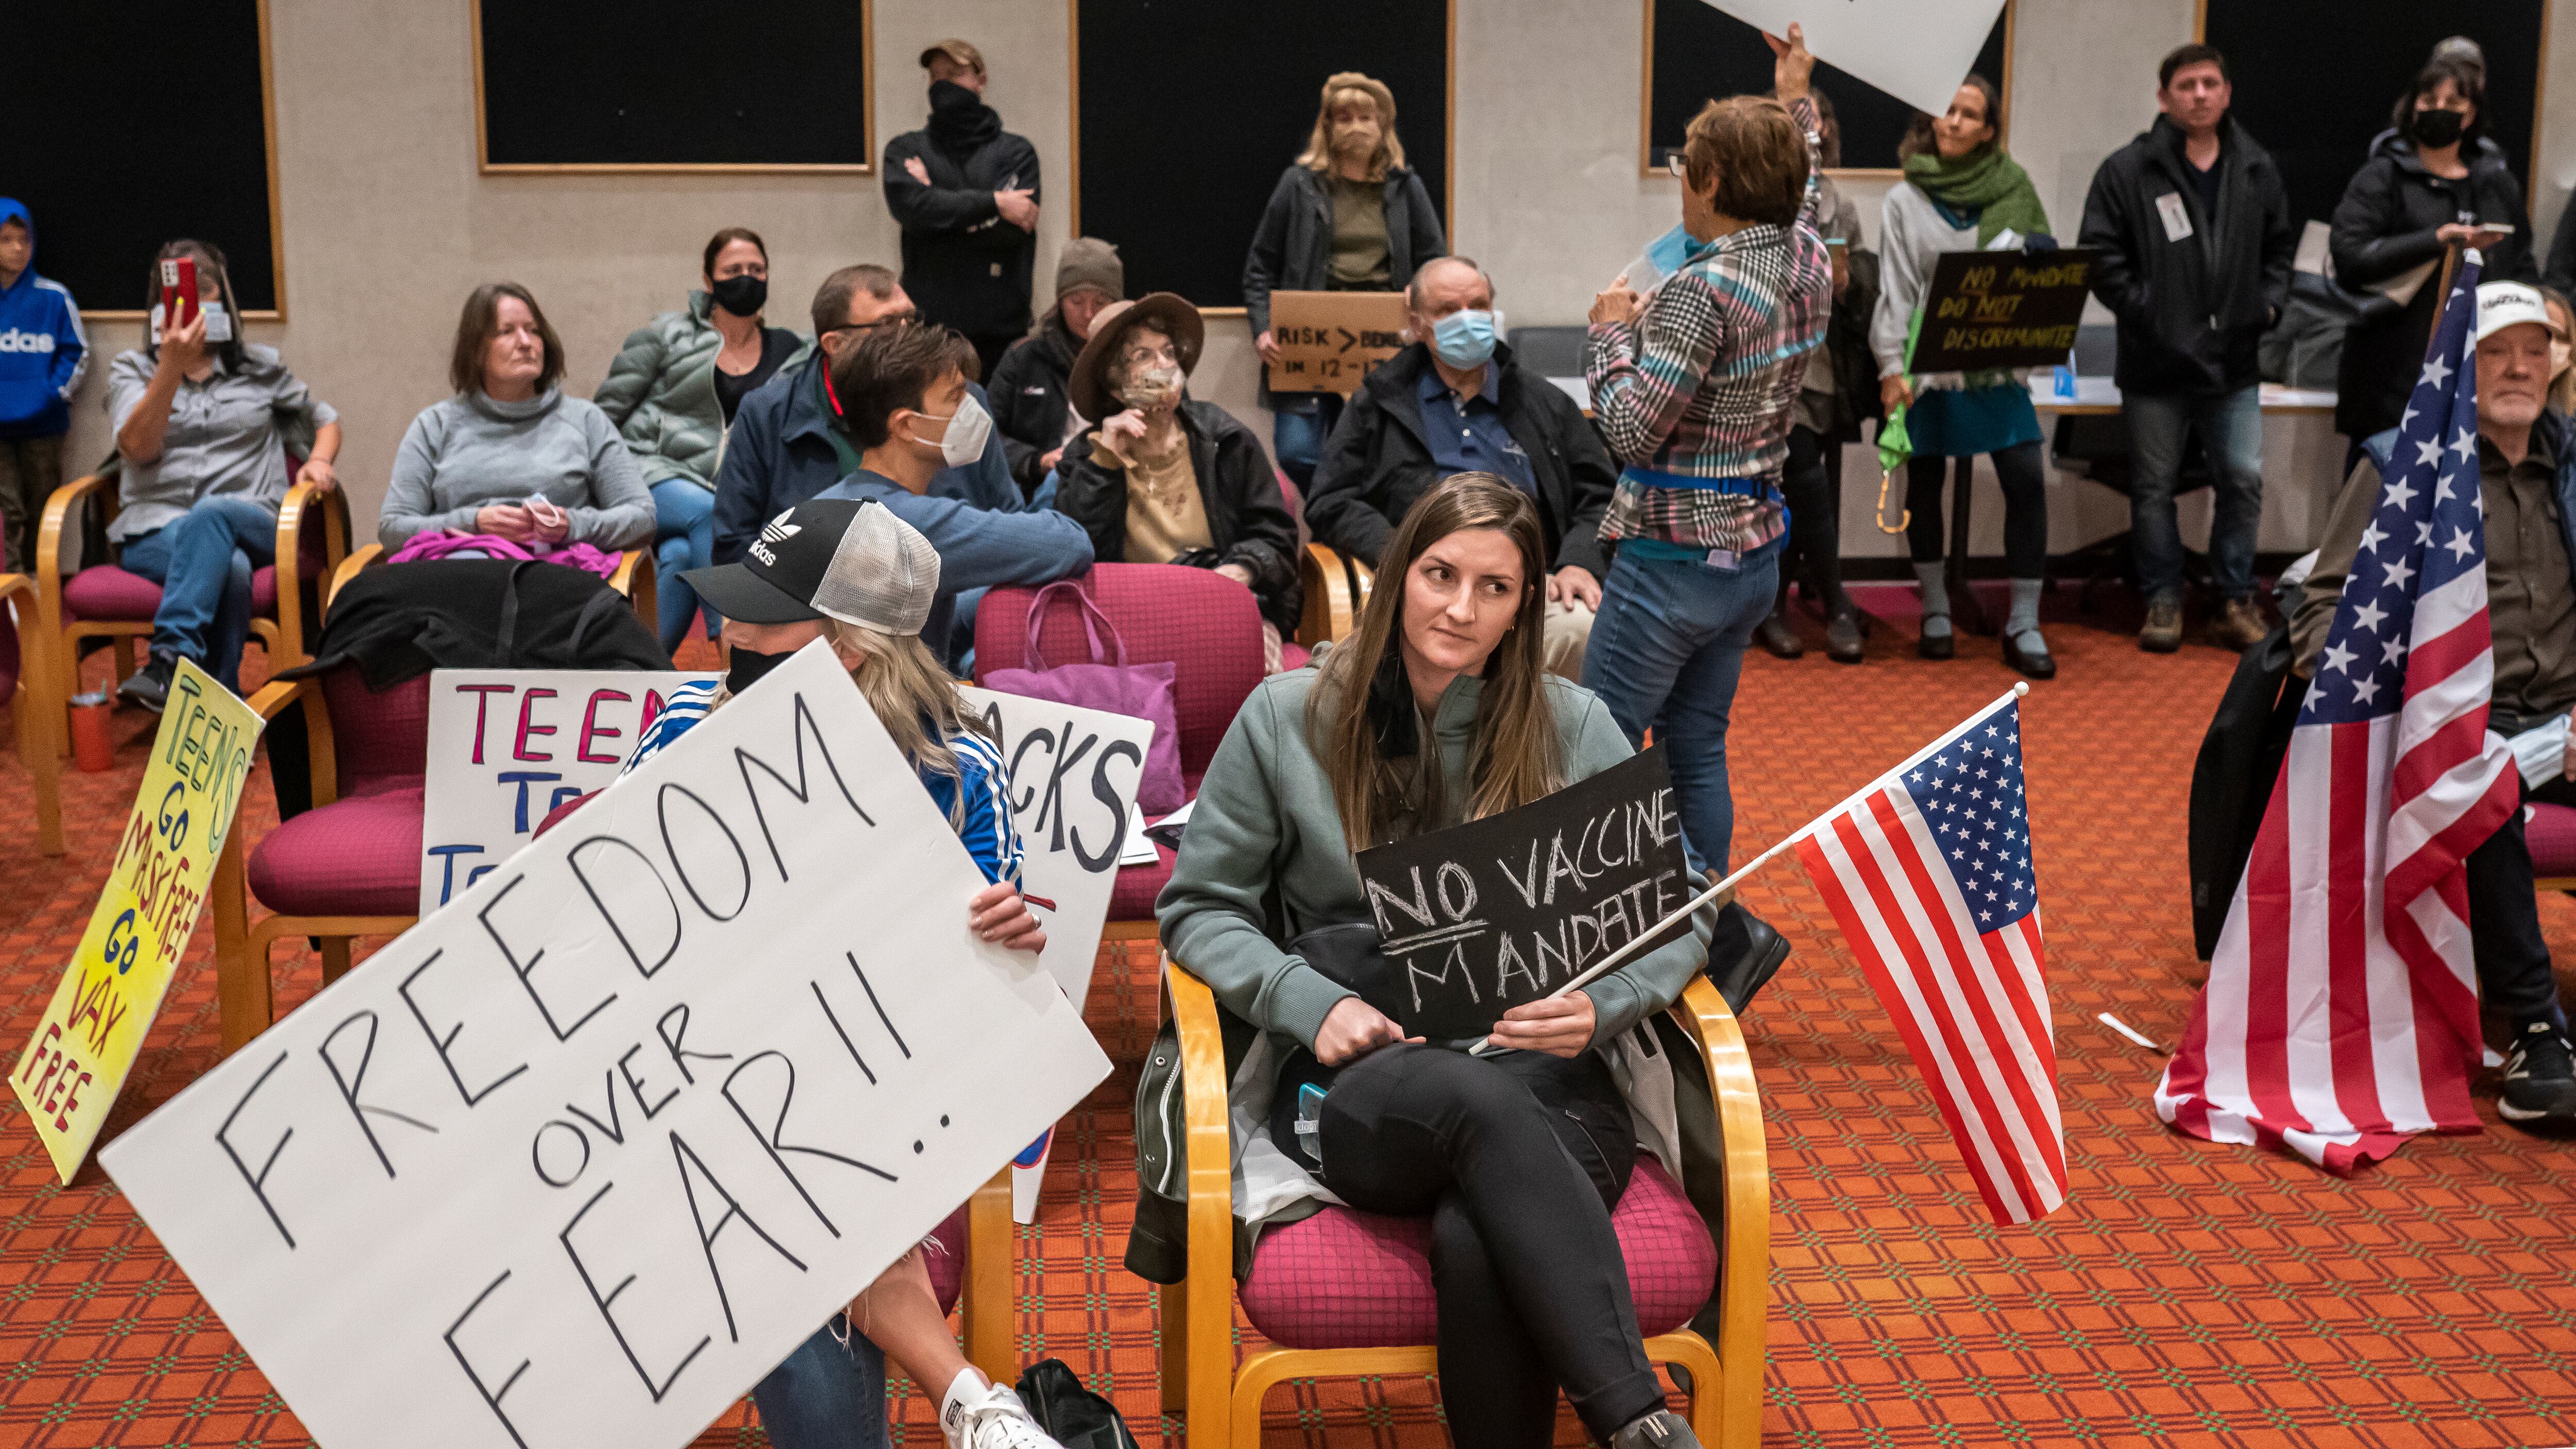 Several citizens hold American flags and signage while protesting at a school board meeting. The sign closes to the front of the crowd reads, “FREEDOM OVER FEAR” in large block letters.